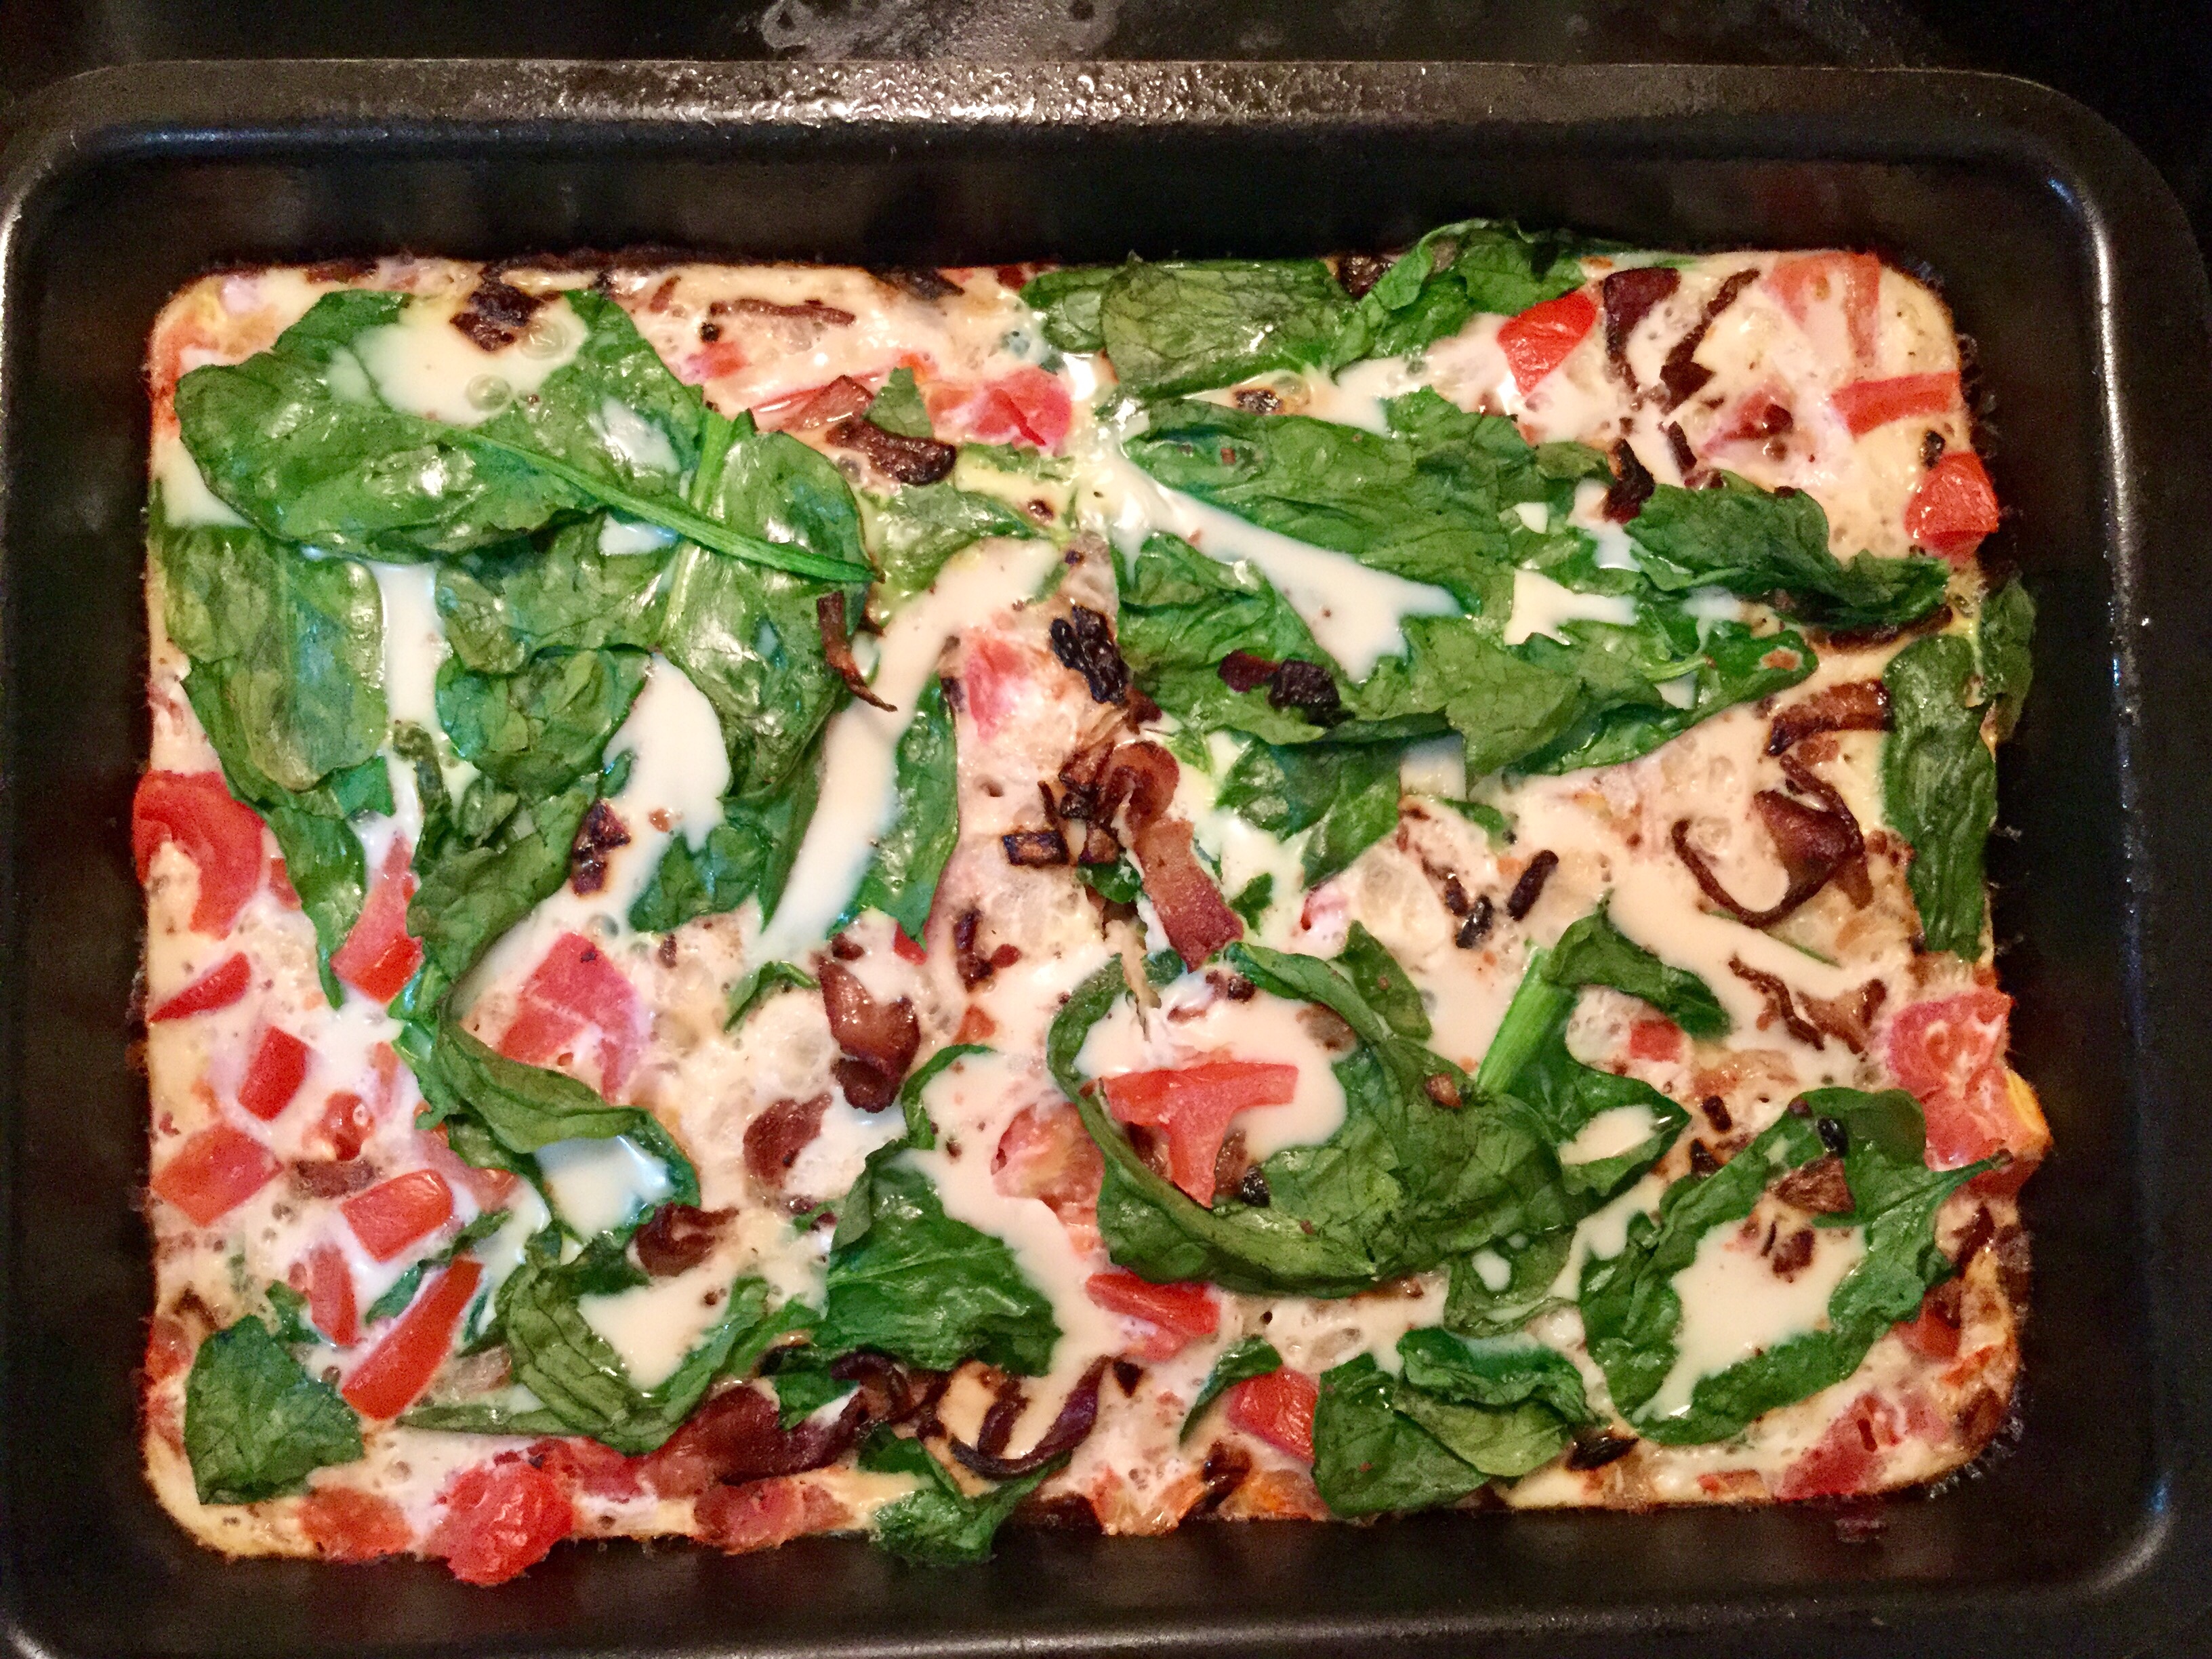 Egg white and Spinach Breakfast Bake 